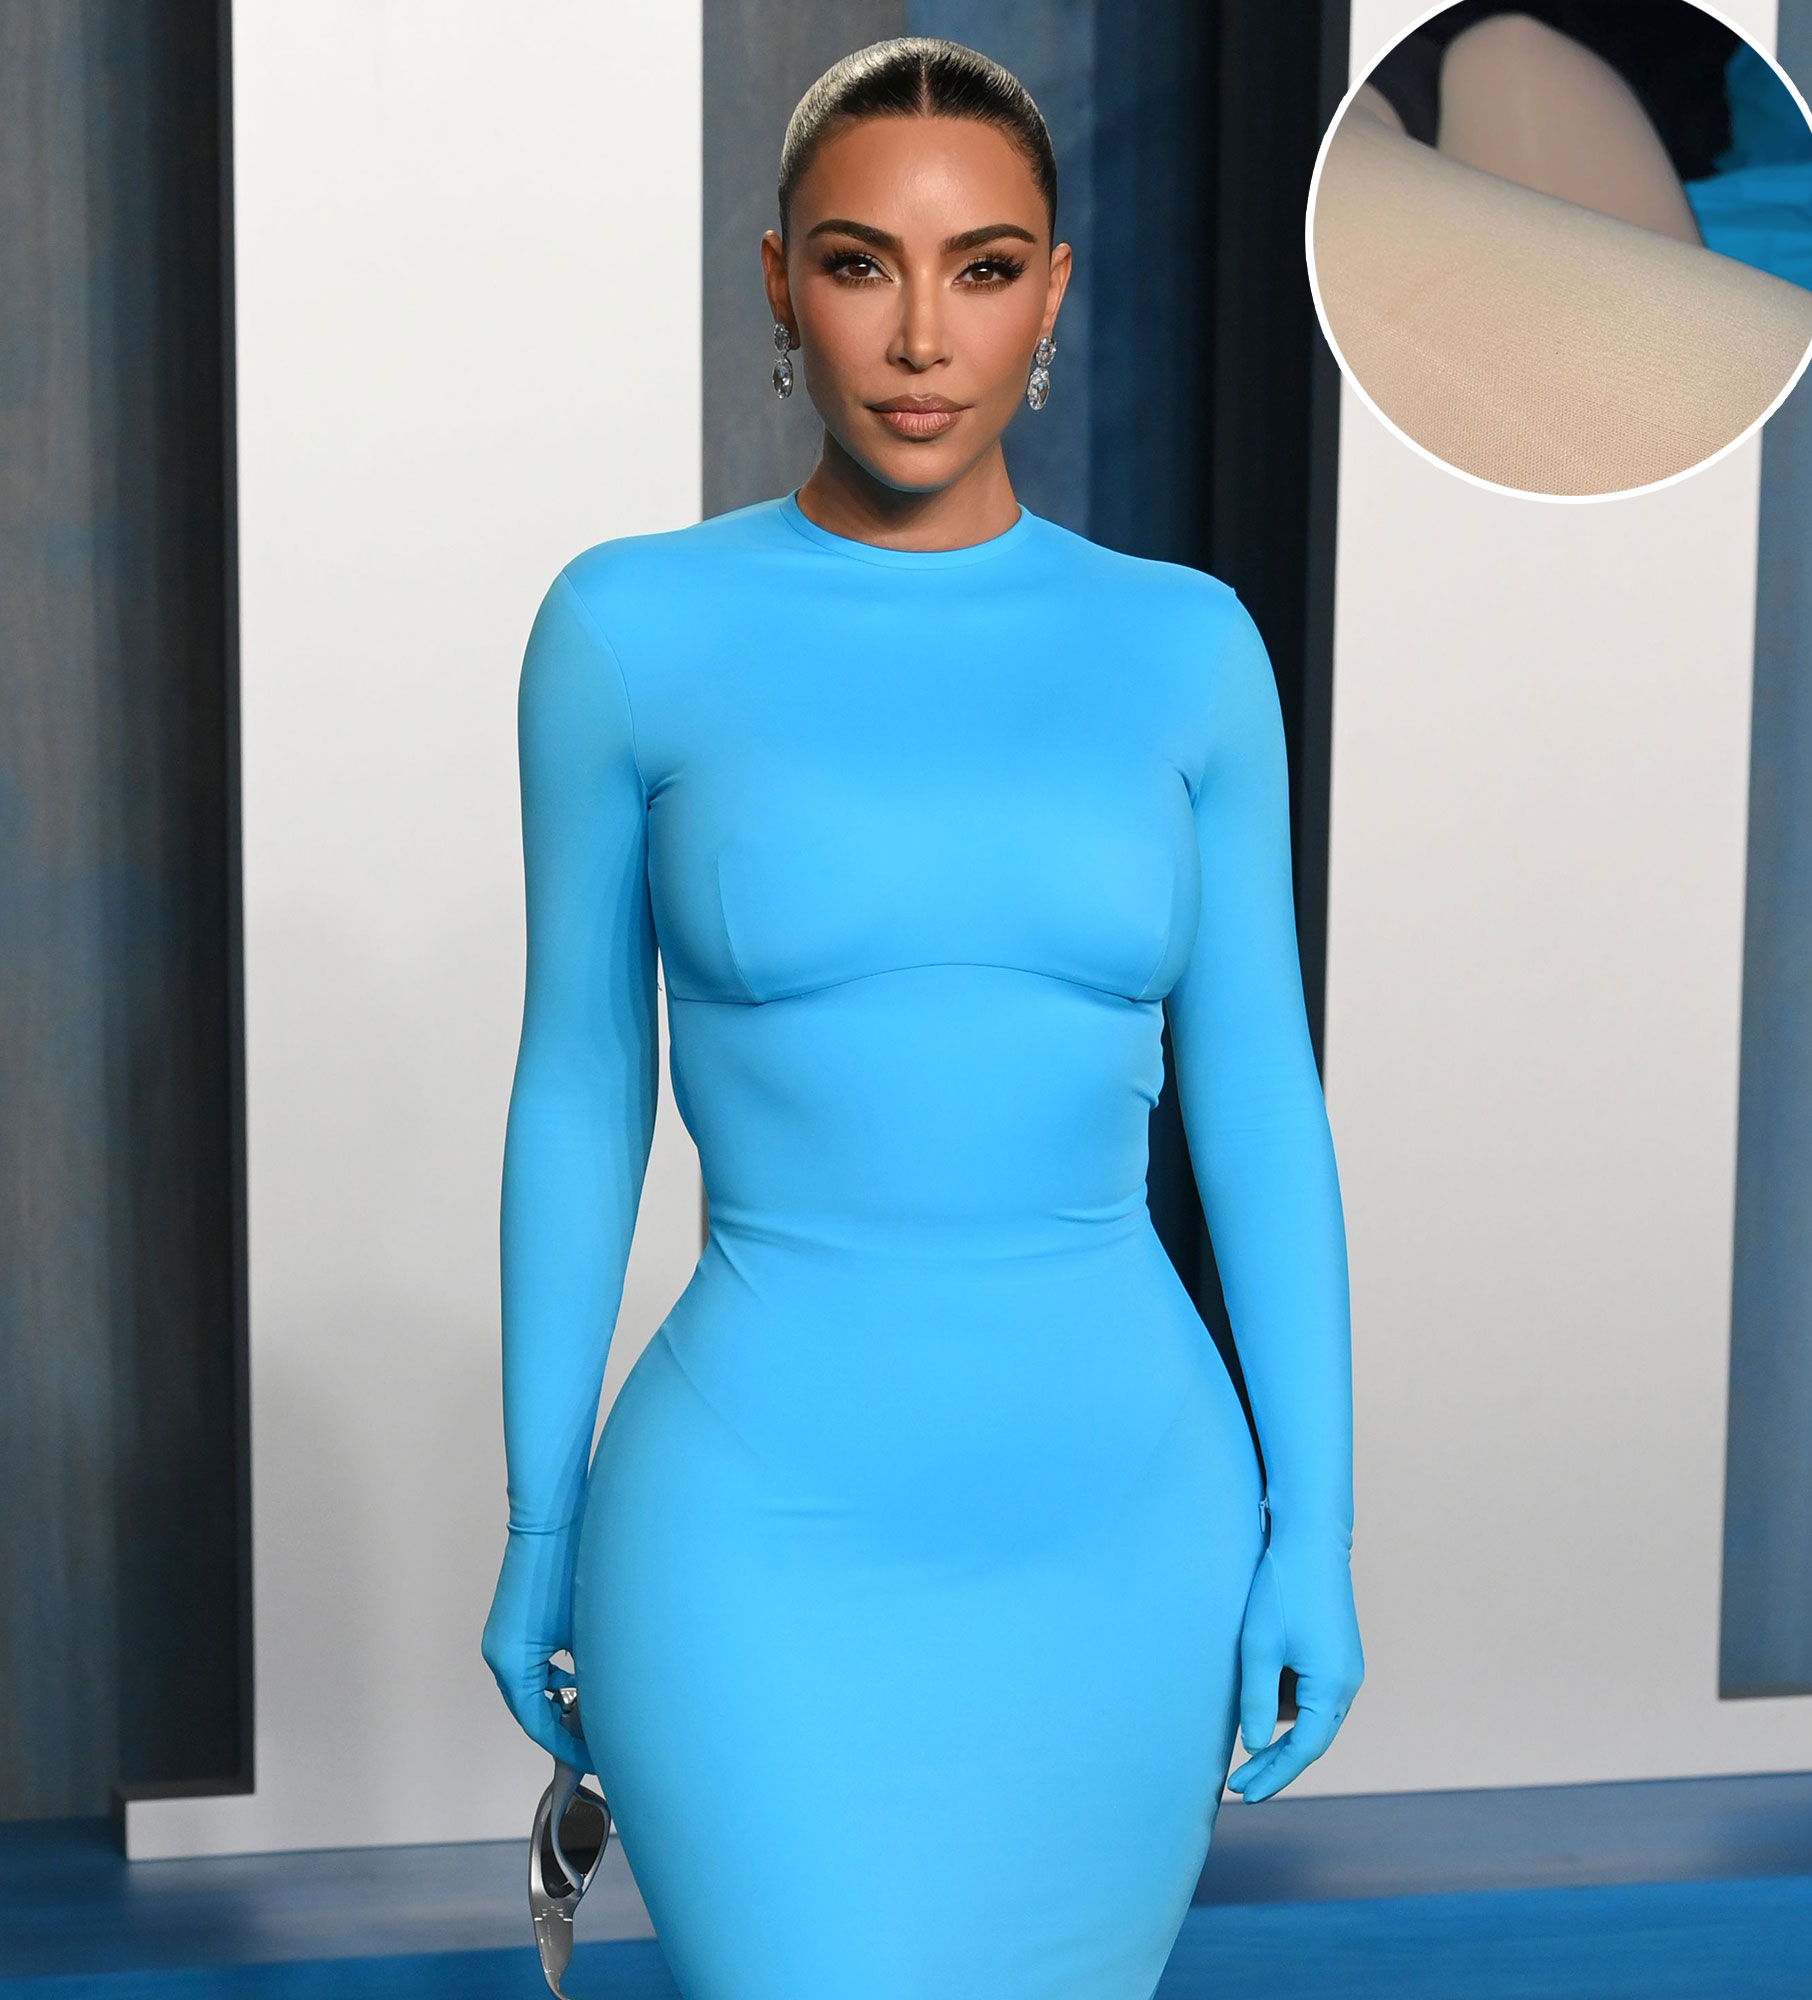 Kim Kardashian goes without underwear in skintight silk dress as she drops  major career news in time for New Year's Eve